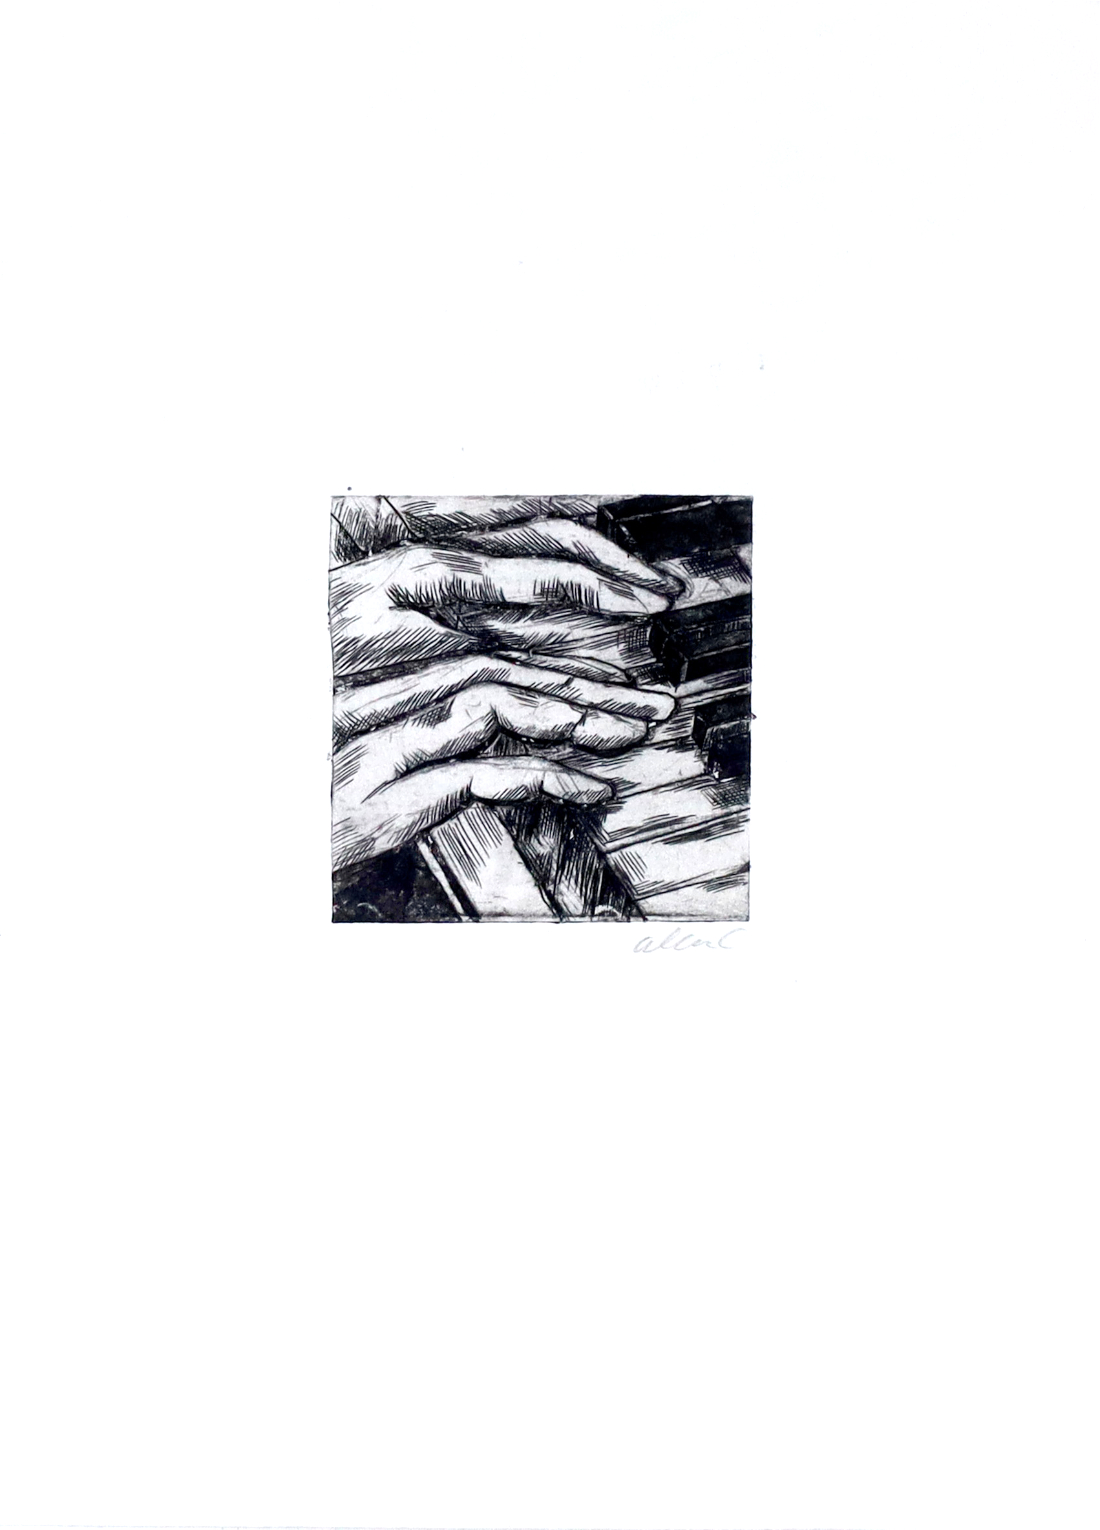 etching of a closeup of fingers on piano keys